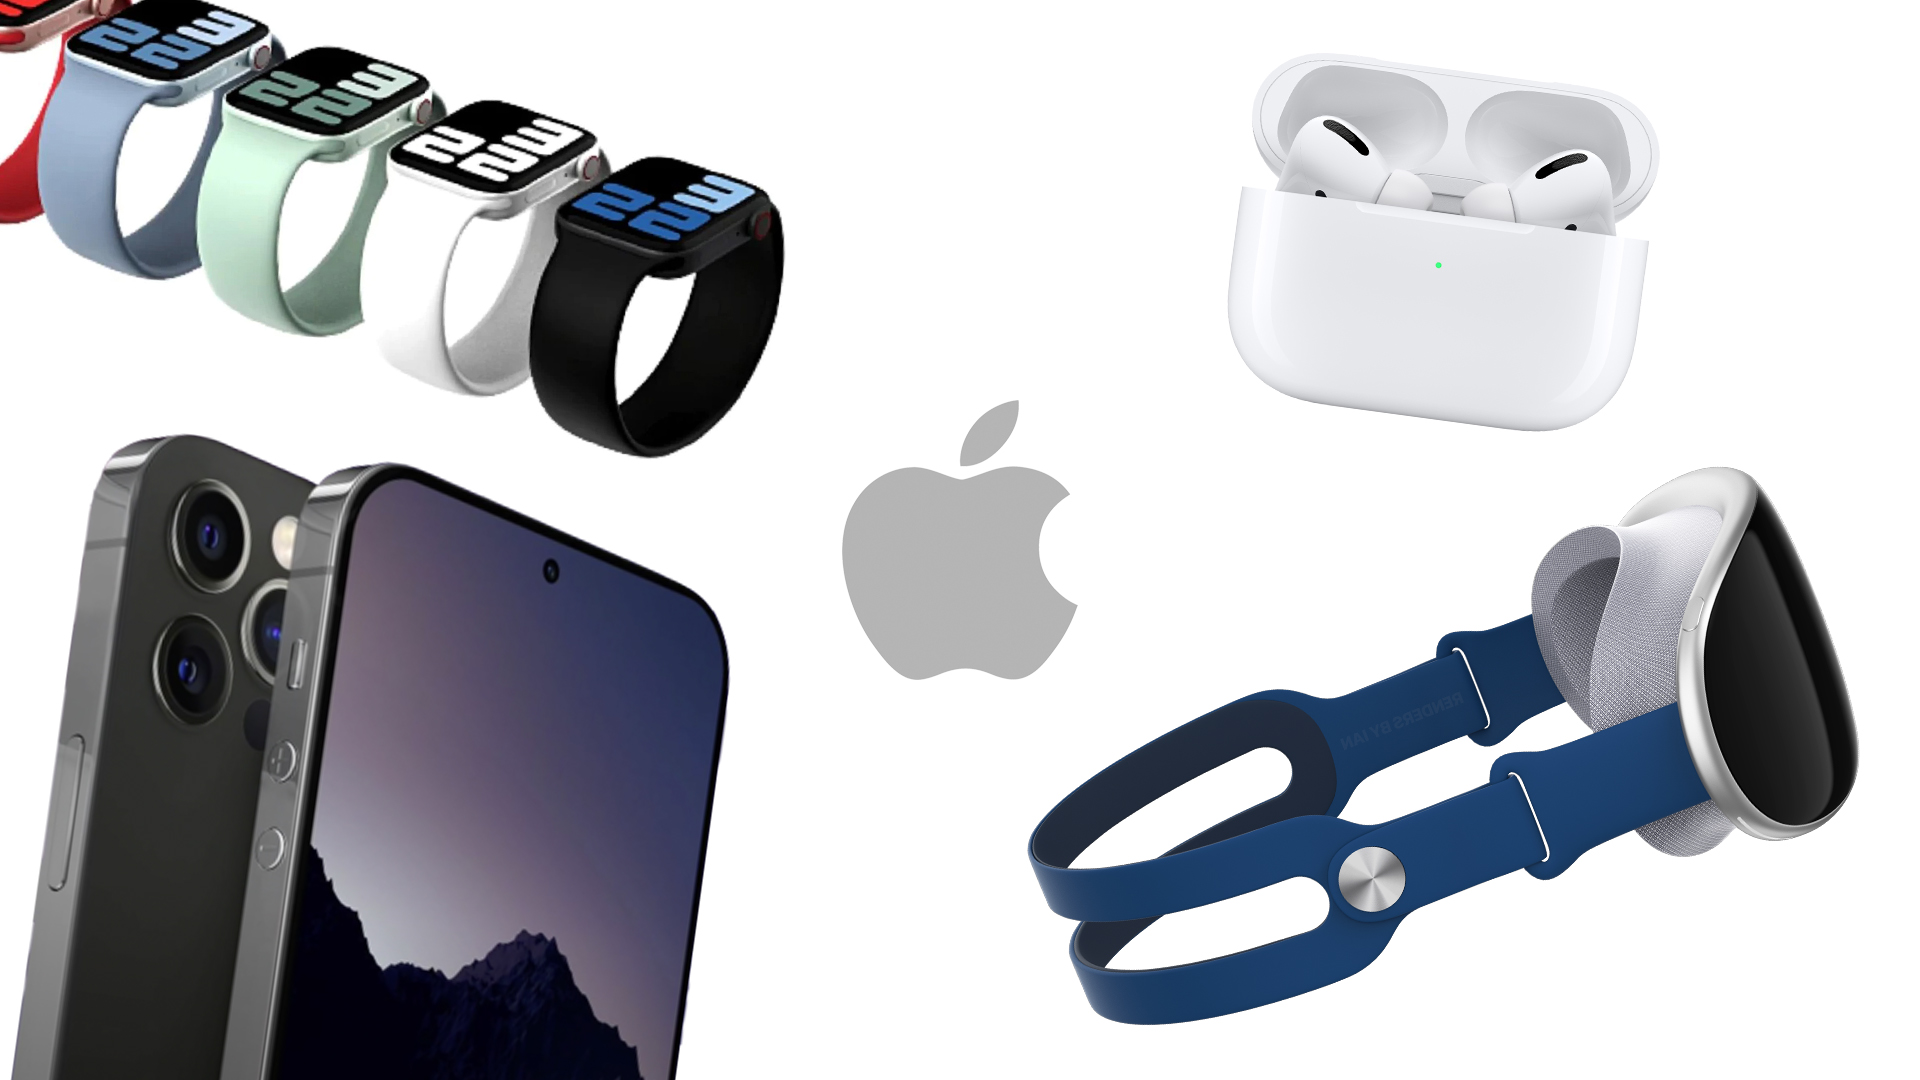 apple-event-all-product-model